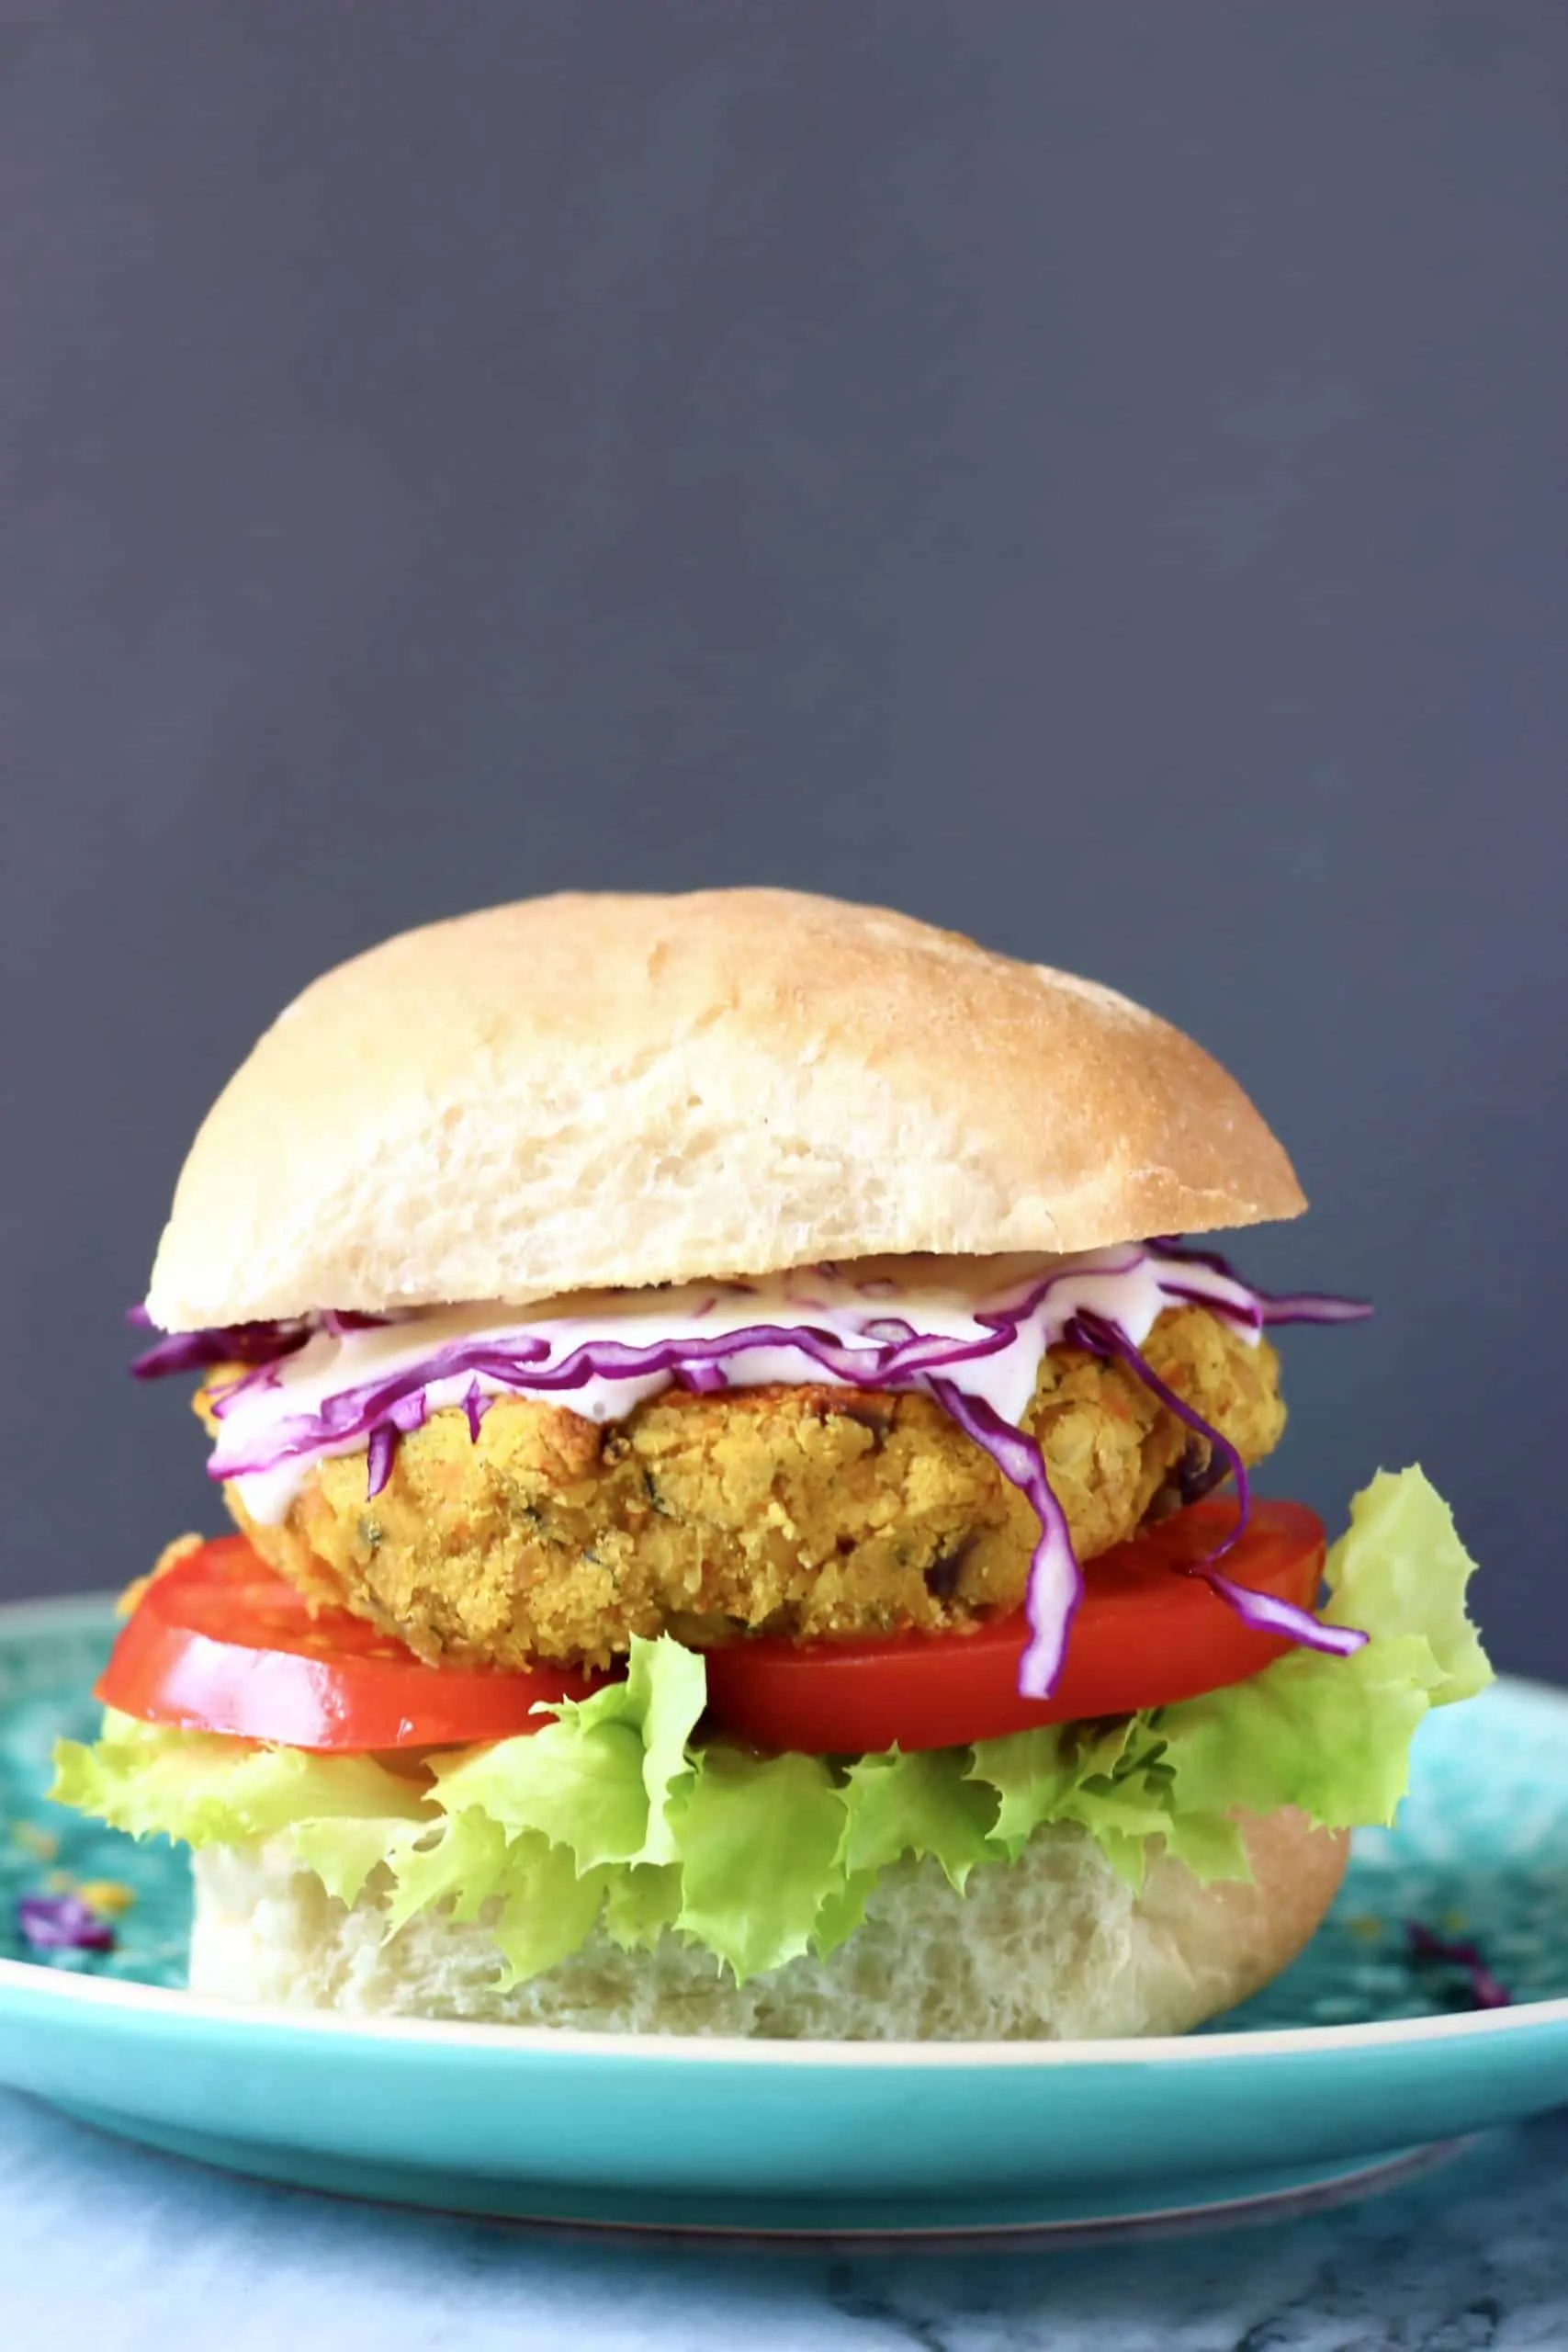 Curried chickpea burger with salad on a blue plate